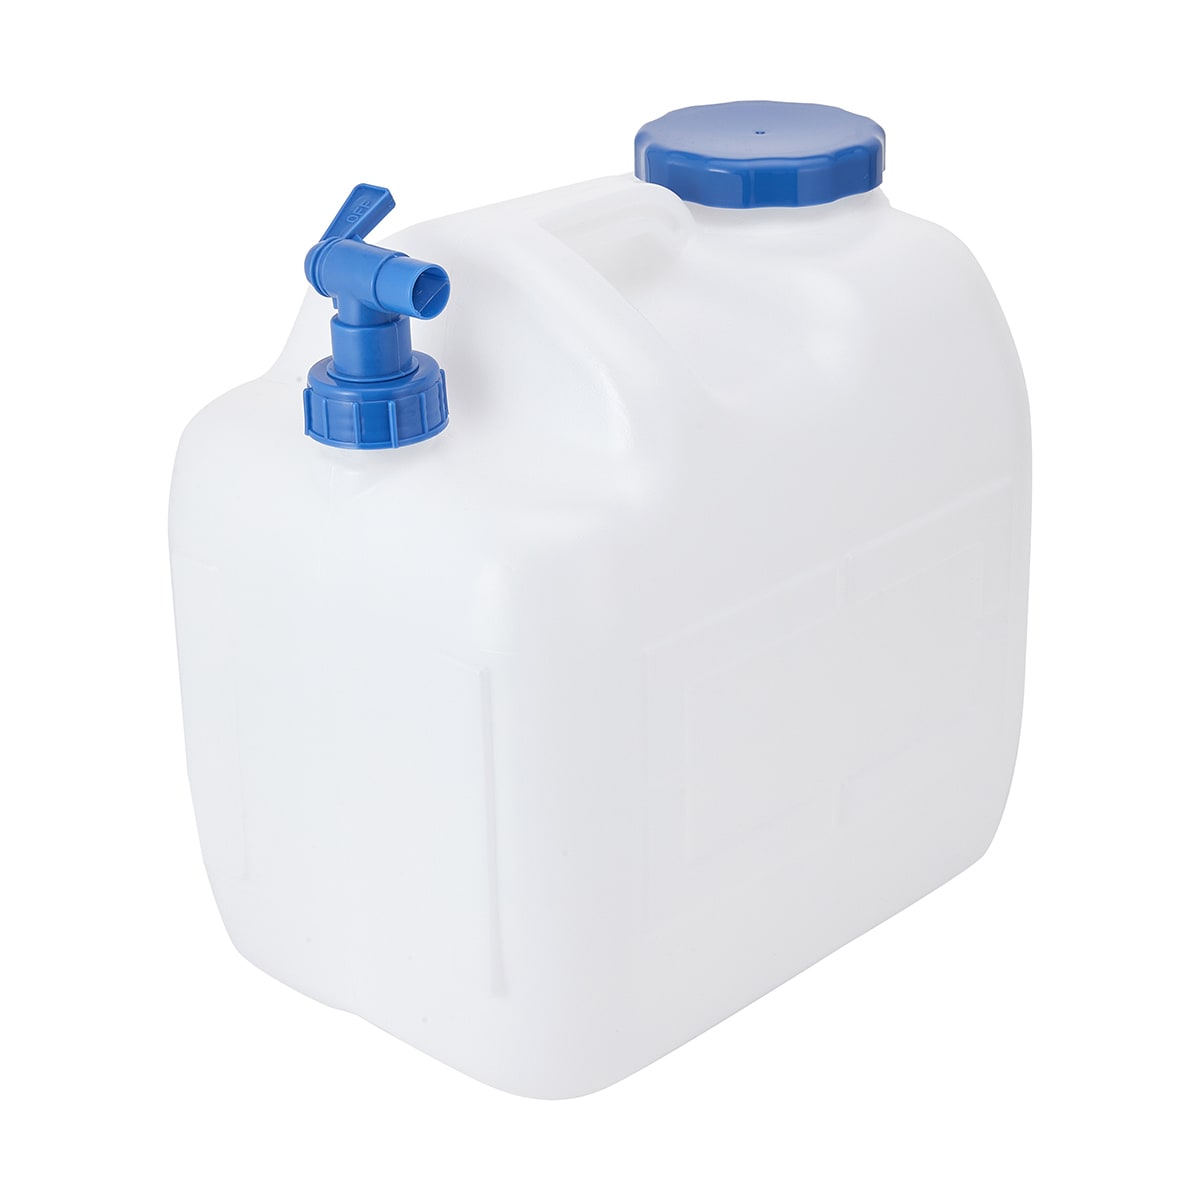 23 Litre Water Container from Kmart Australia!